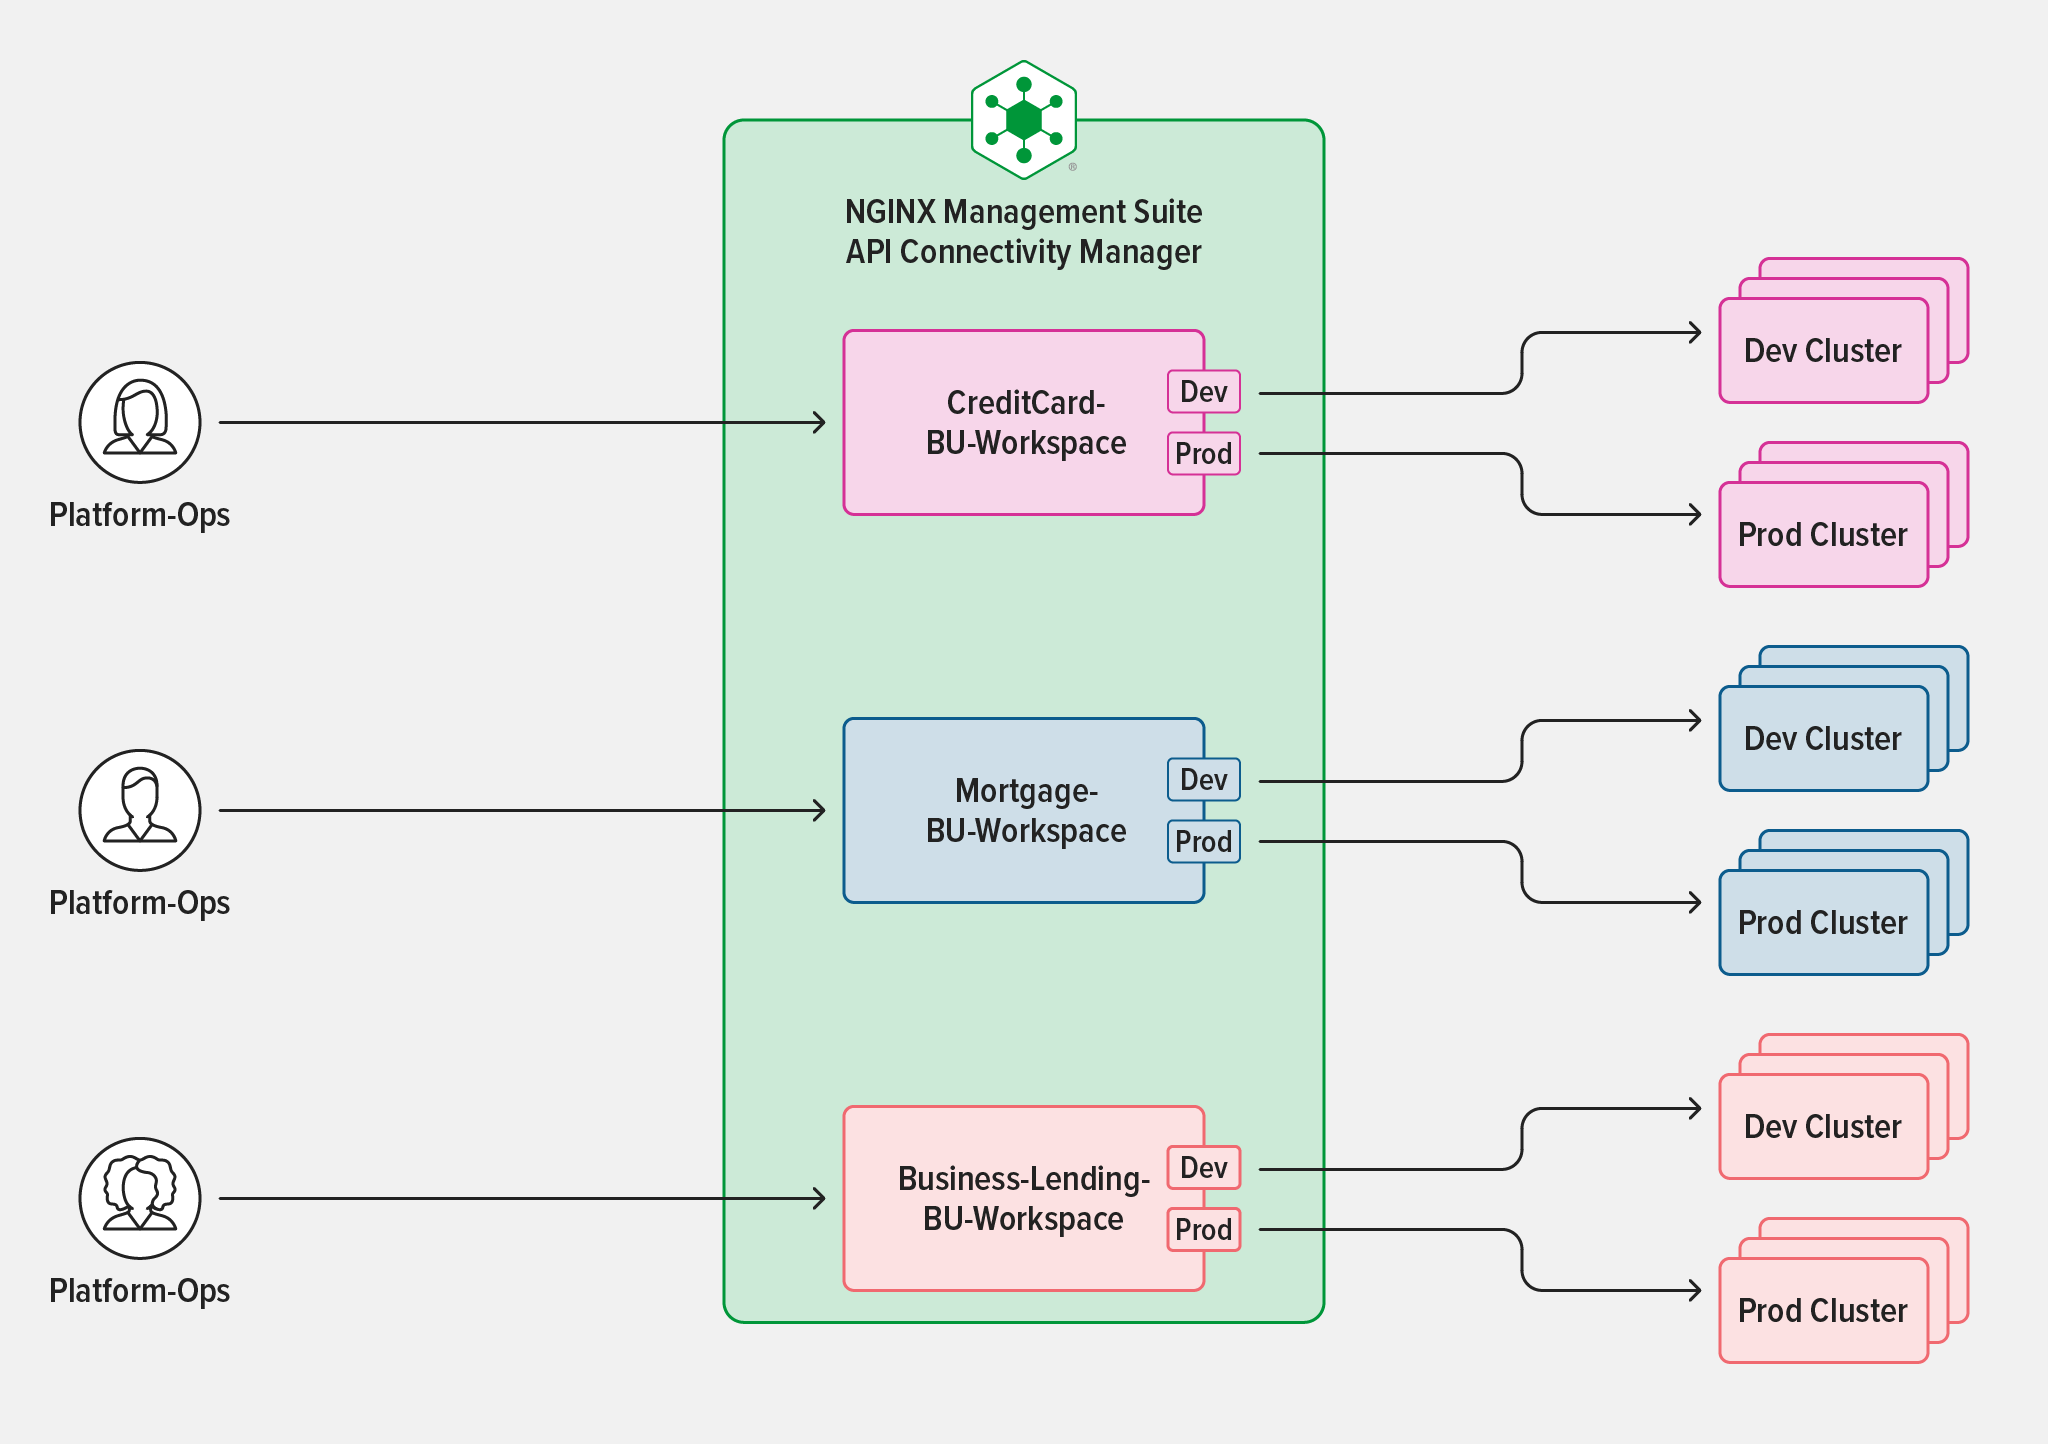 Diagram showing how API Connectivity Manager enables multiple groups to manage their own Workspaces and Environments